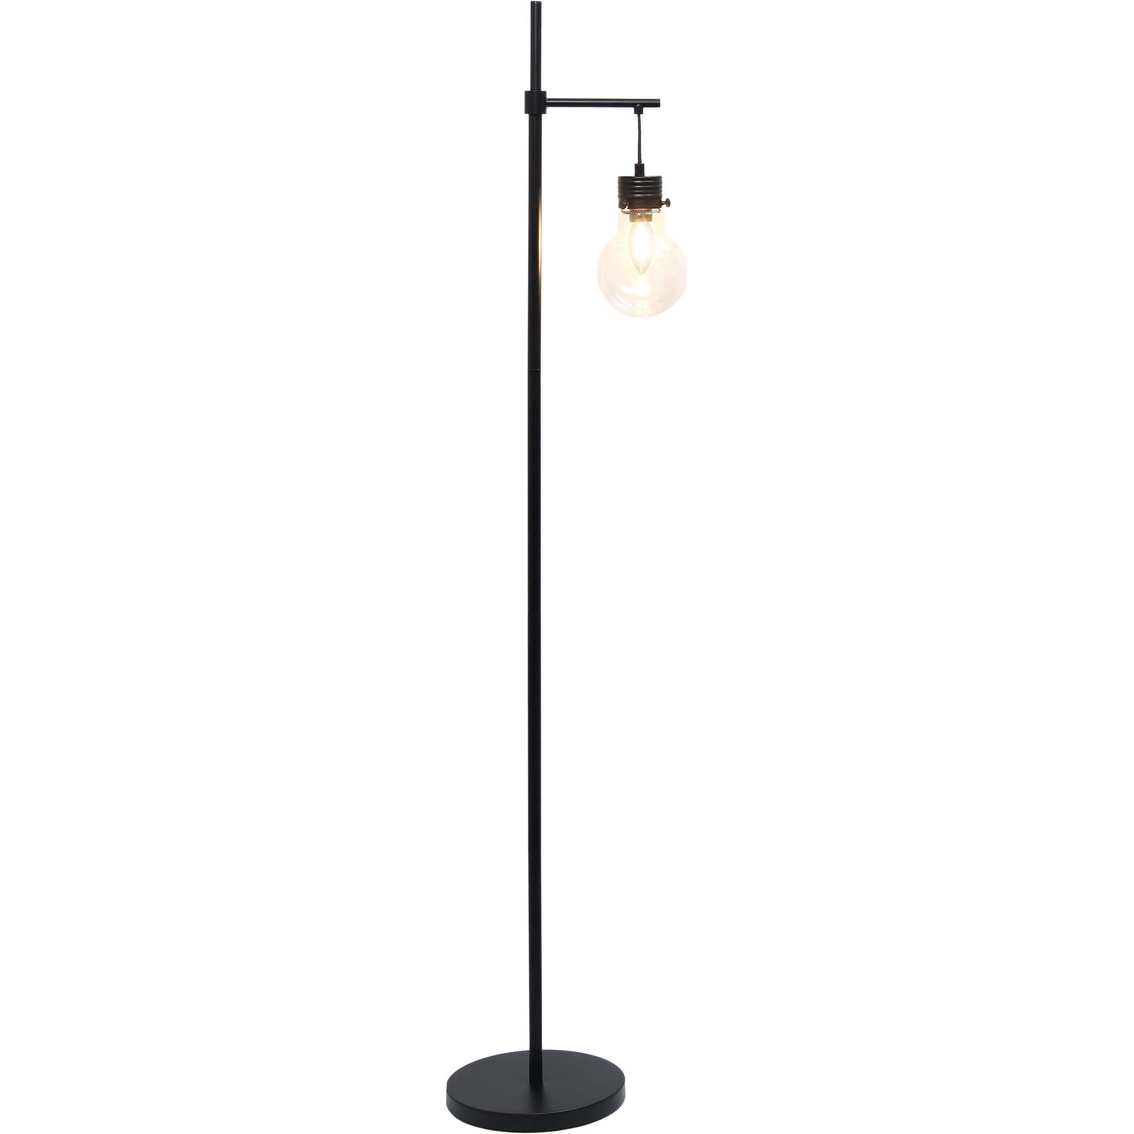 Lalia Home Black Matte 1 Light Beacon Floor Lamp with Clear Glass Shade - Image 2 of 9